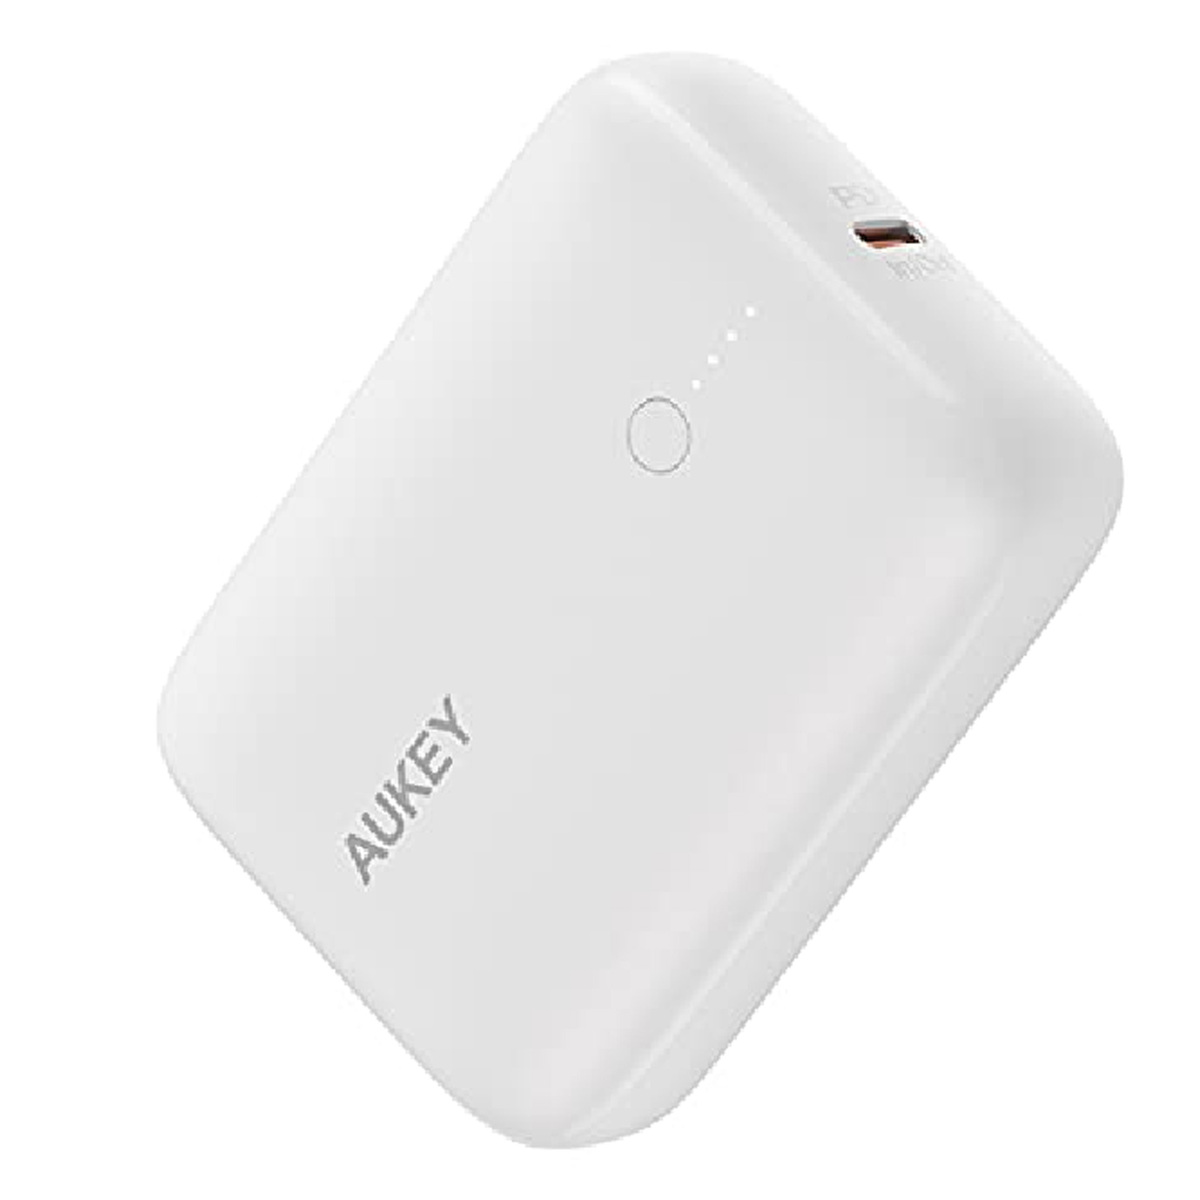 Aukey Power Bank Portable Charger, 10000mAh Battery Capacity, 20W Power Delivery, Intelligent Safety Protection, Quick Charge 3.0, Ultra Compact, Broad Compatibility, White-PB-N83S